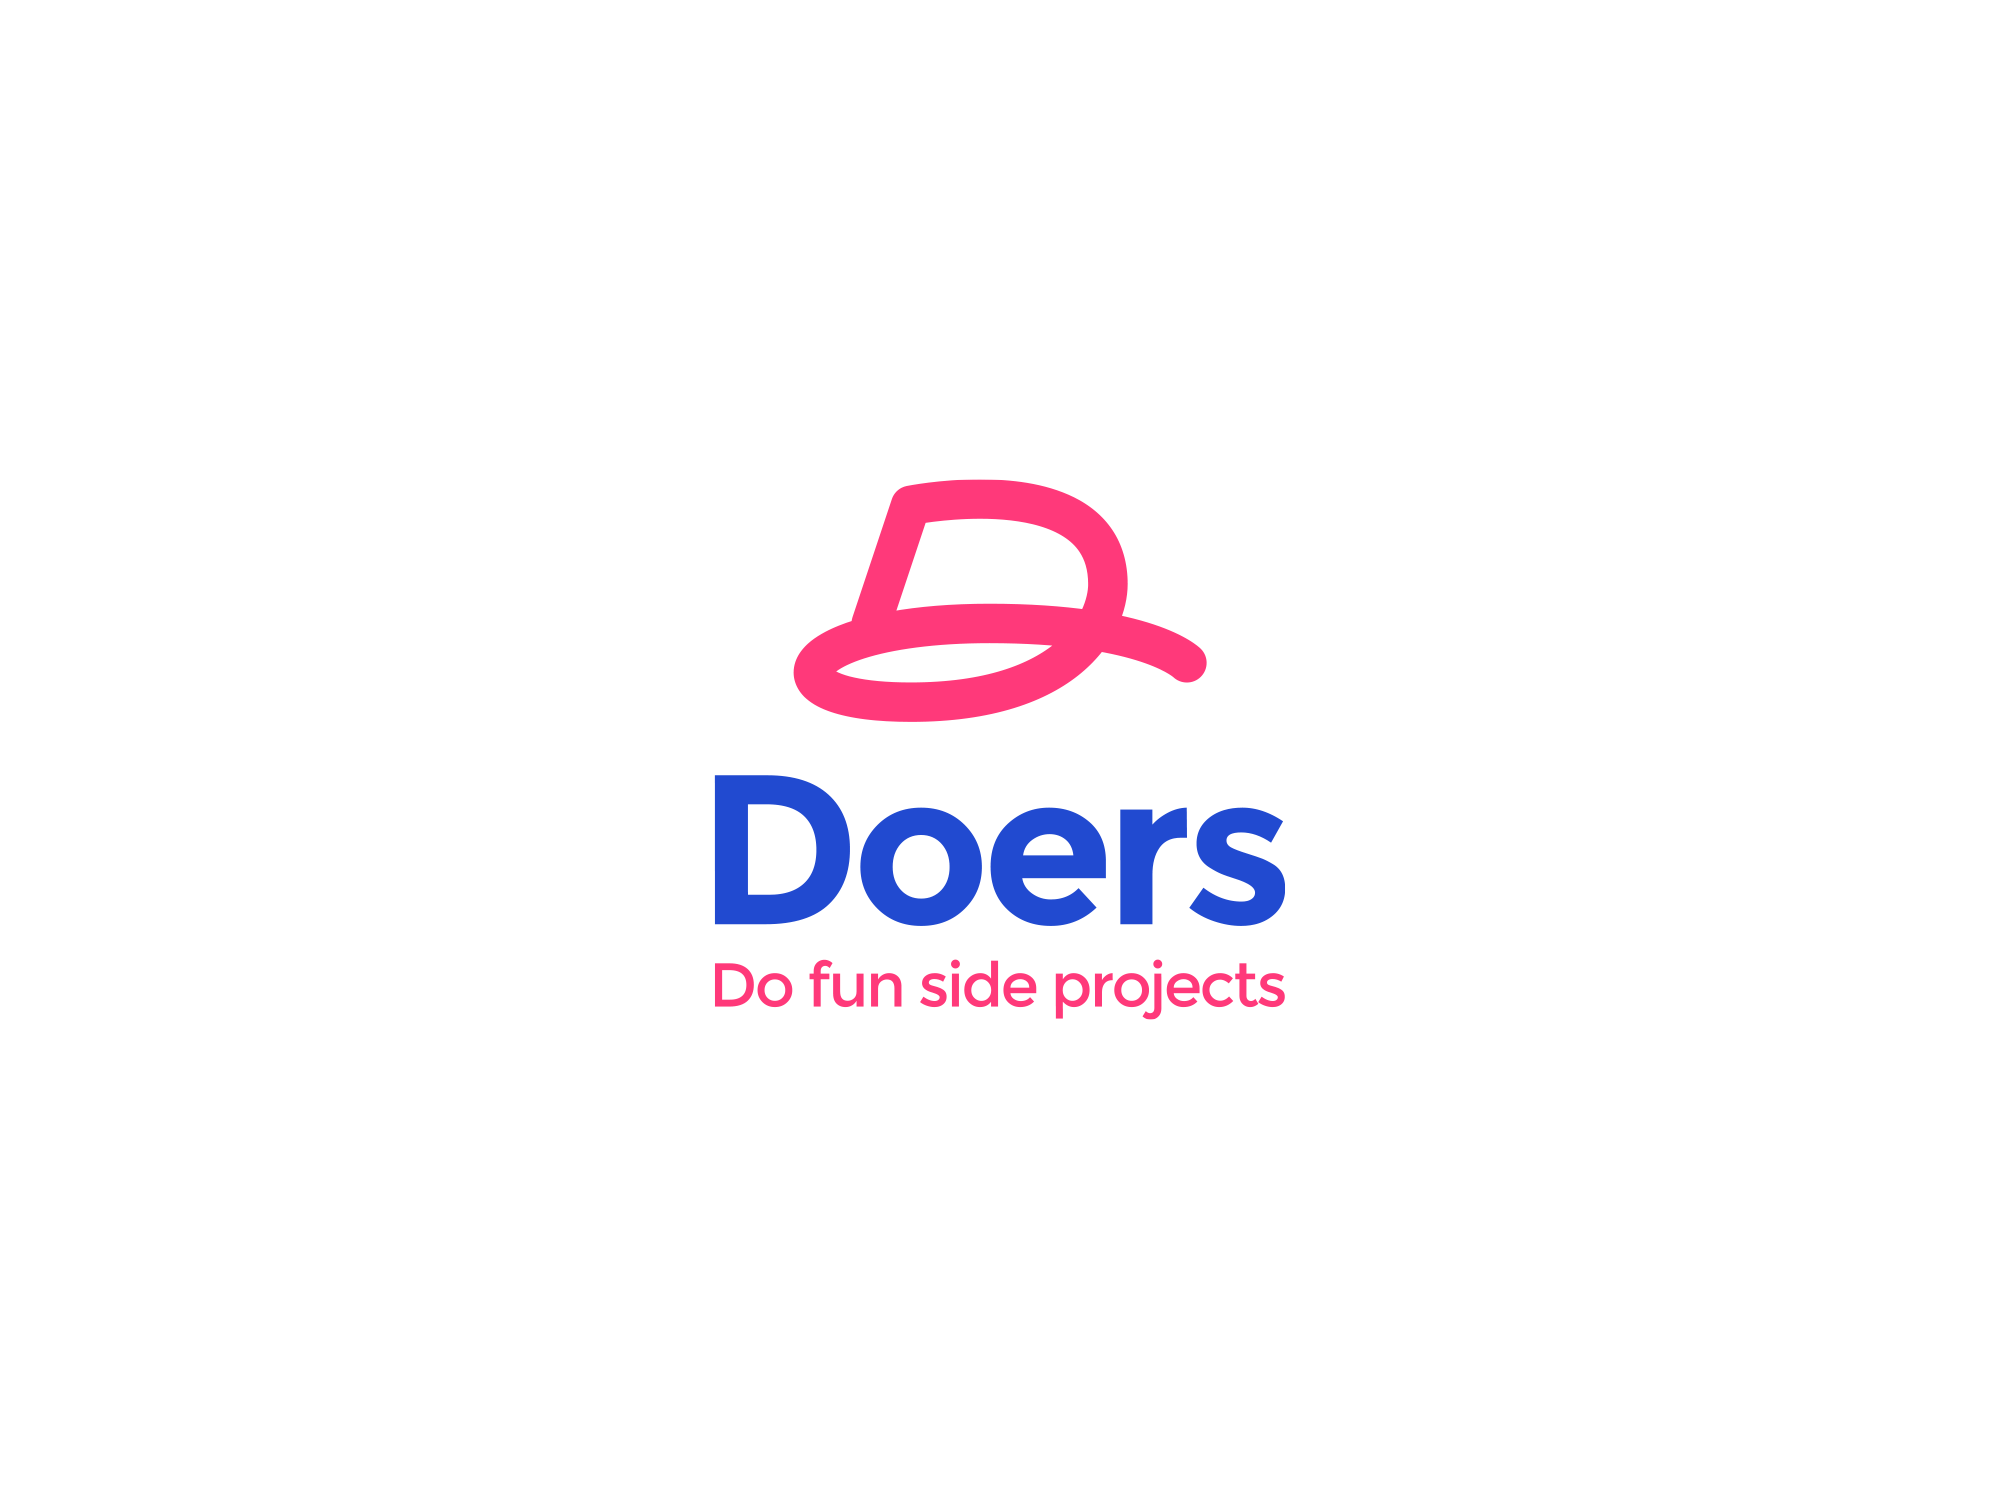 Logo created for Doers startup company - Do fun side projects